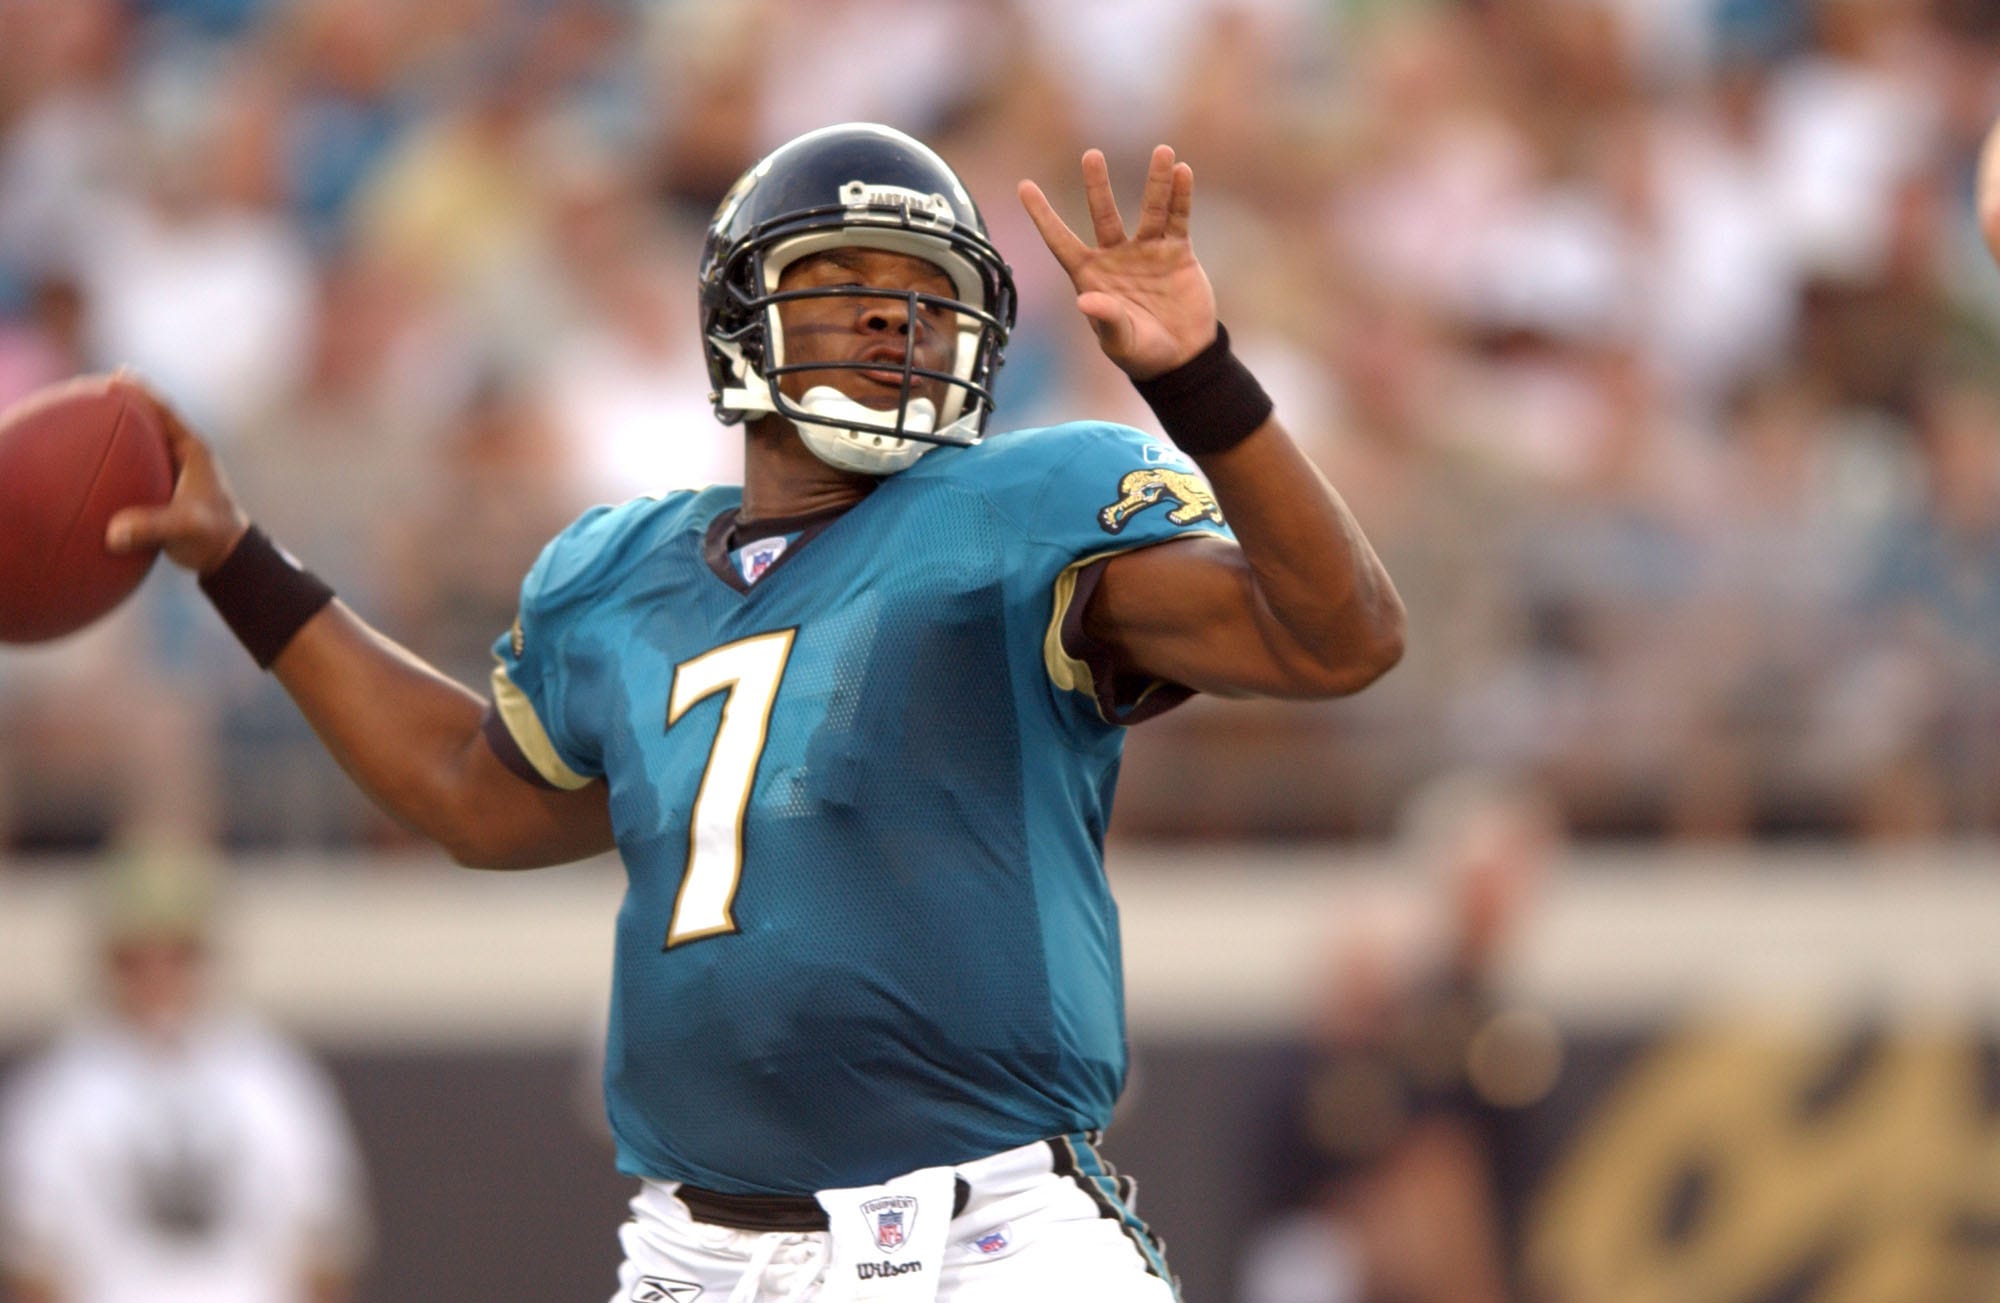 Byron Leftwich: Photos through the years of former Jaguars quarterback